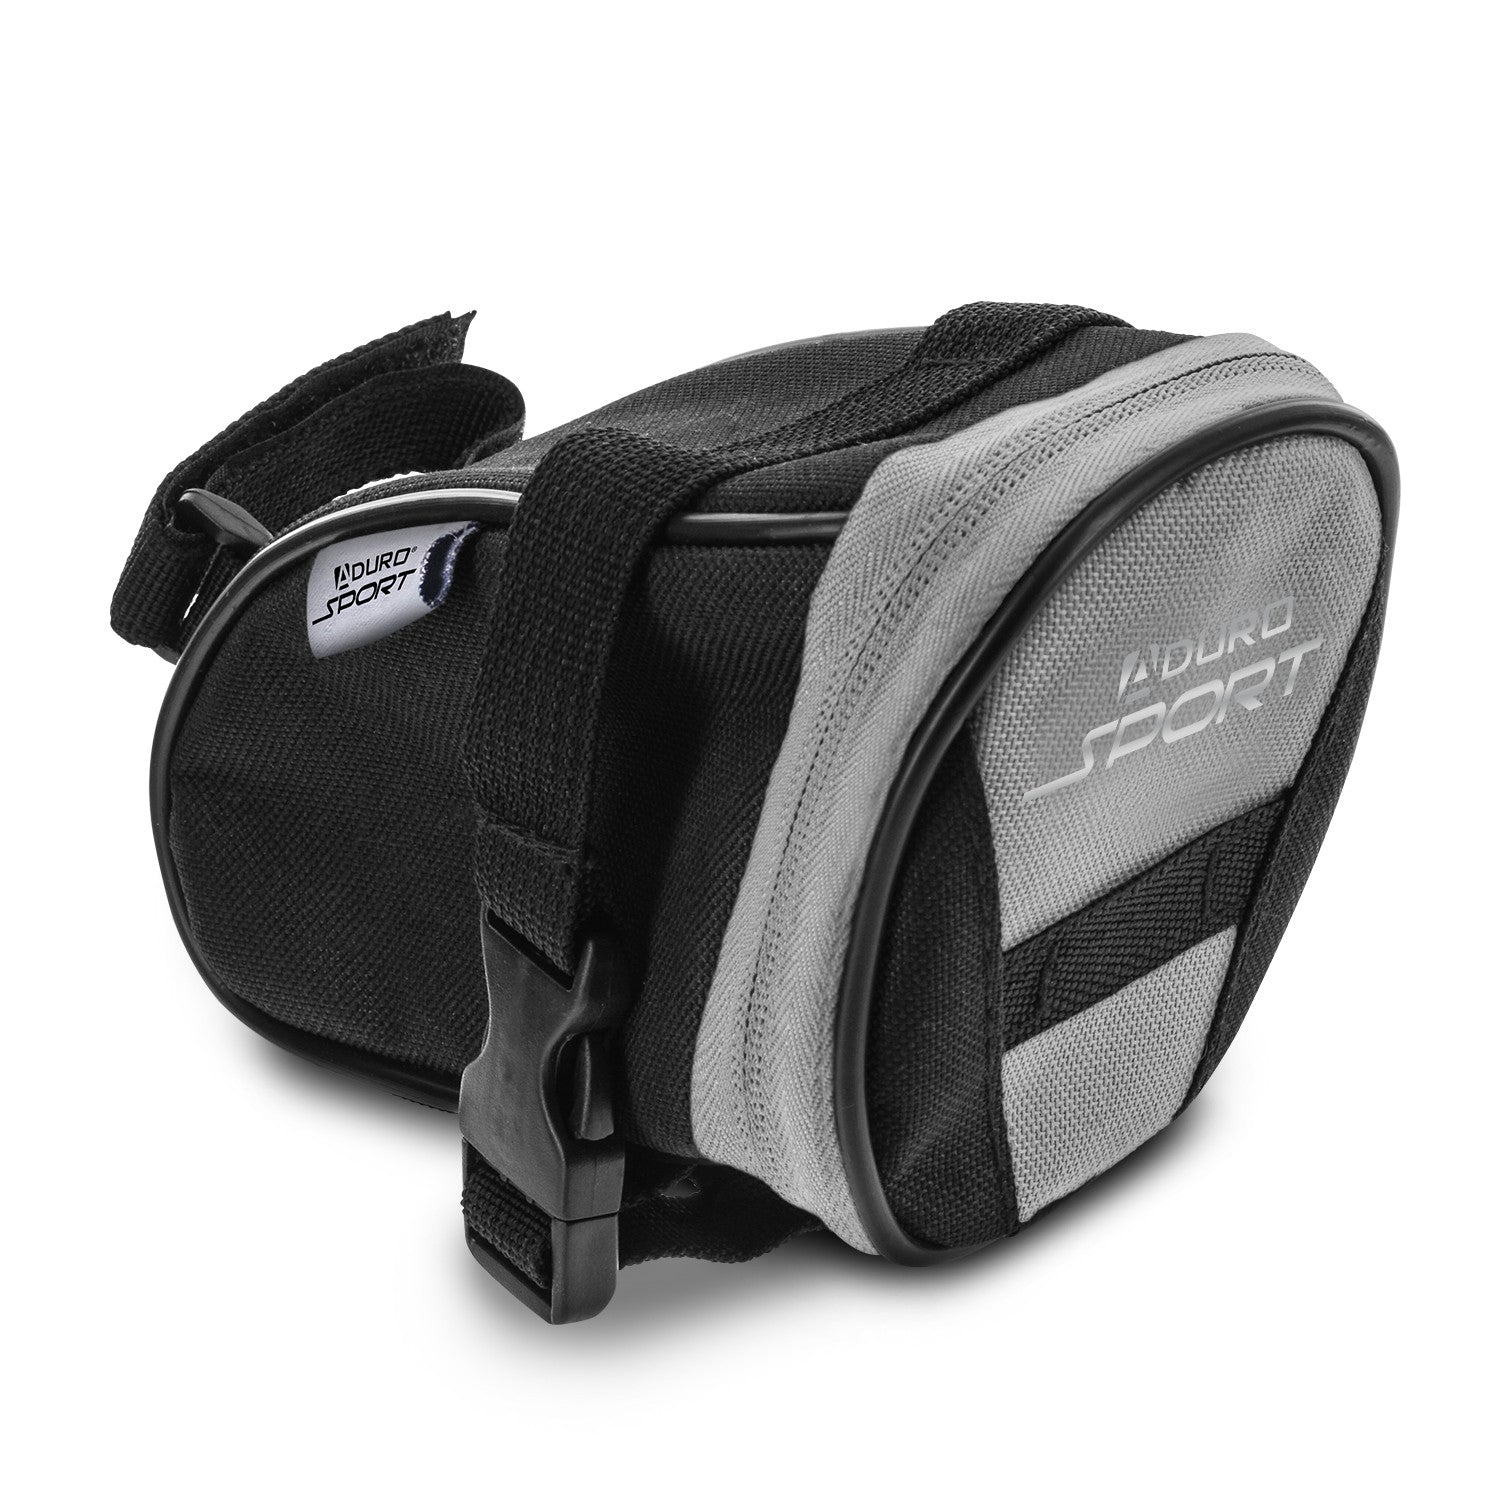 Amazon.com: State Bicycle Co. Bicycle Frame Pouch Bag. 2.5L Big Storage,  Bike Triangle Wedge Framebag For Mountain Bikes, Road Bikes, City Bicycles.  Black : Sports & Outdoors